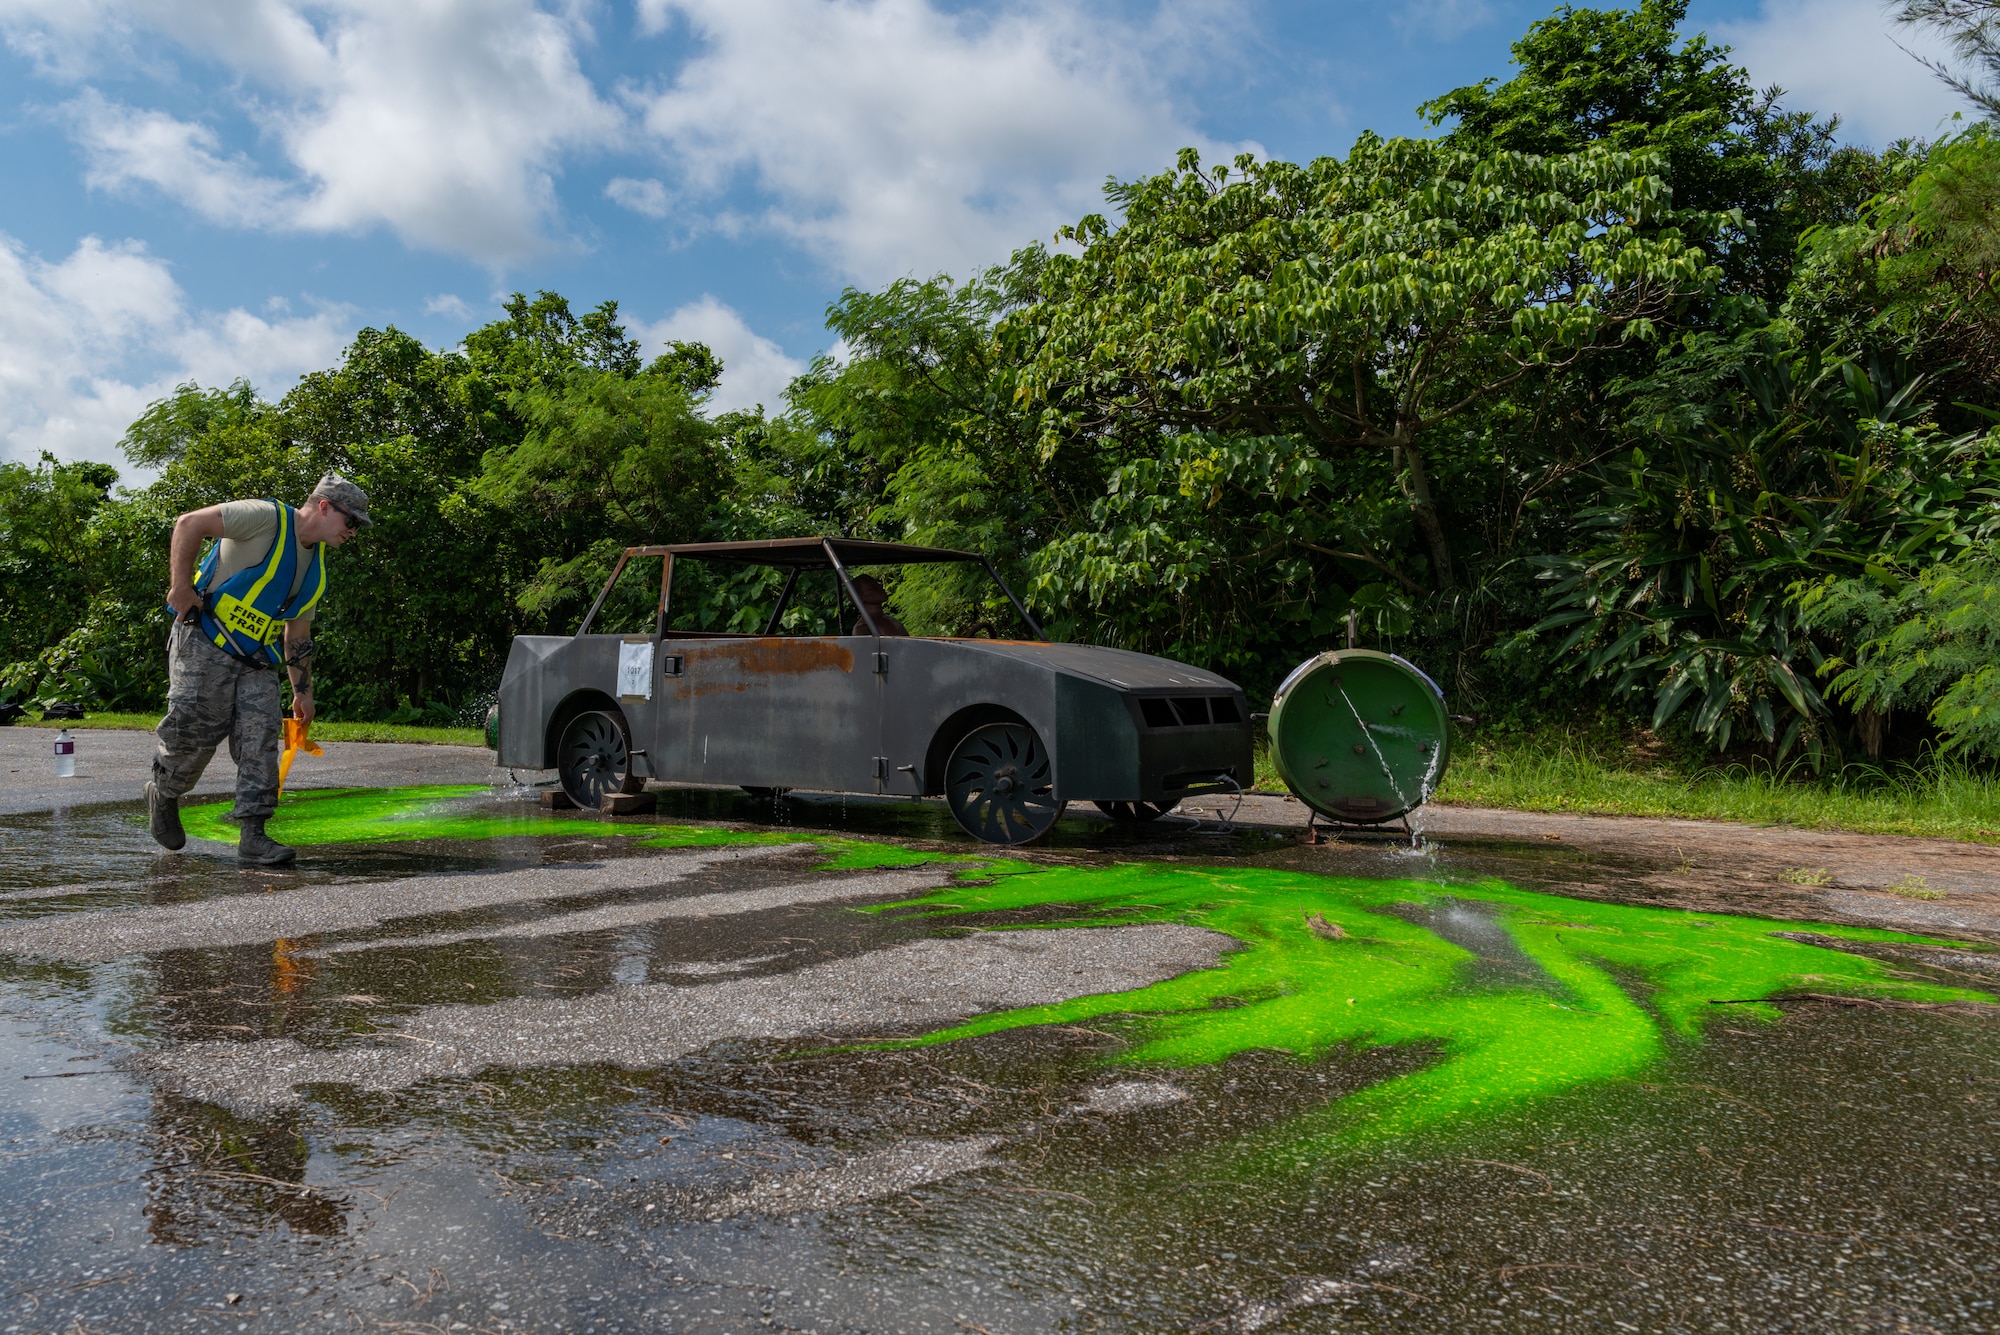 U.S. Air Force Staff Sgt. Ryan Oke, fire emergency services training lead assigned to the 18th Civil Engineer Squadron, spreads green dye to simulate a hazardous chemical during a hazardous material training exercise July 11, 2019, on Kadena Air Base, Japan. The main objective of the HazMat training is for firefighters to familiarize themselves with hazardous materials and prevent them from spreading. (U.S. Air Force photo by Senior Airman Cynthia Belío)